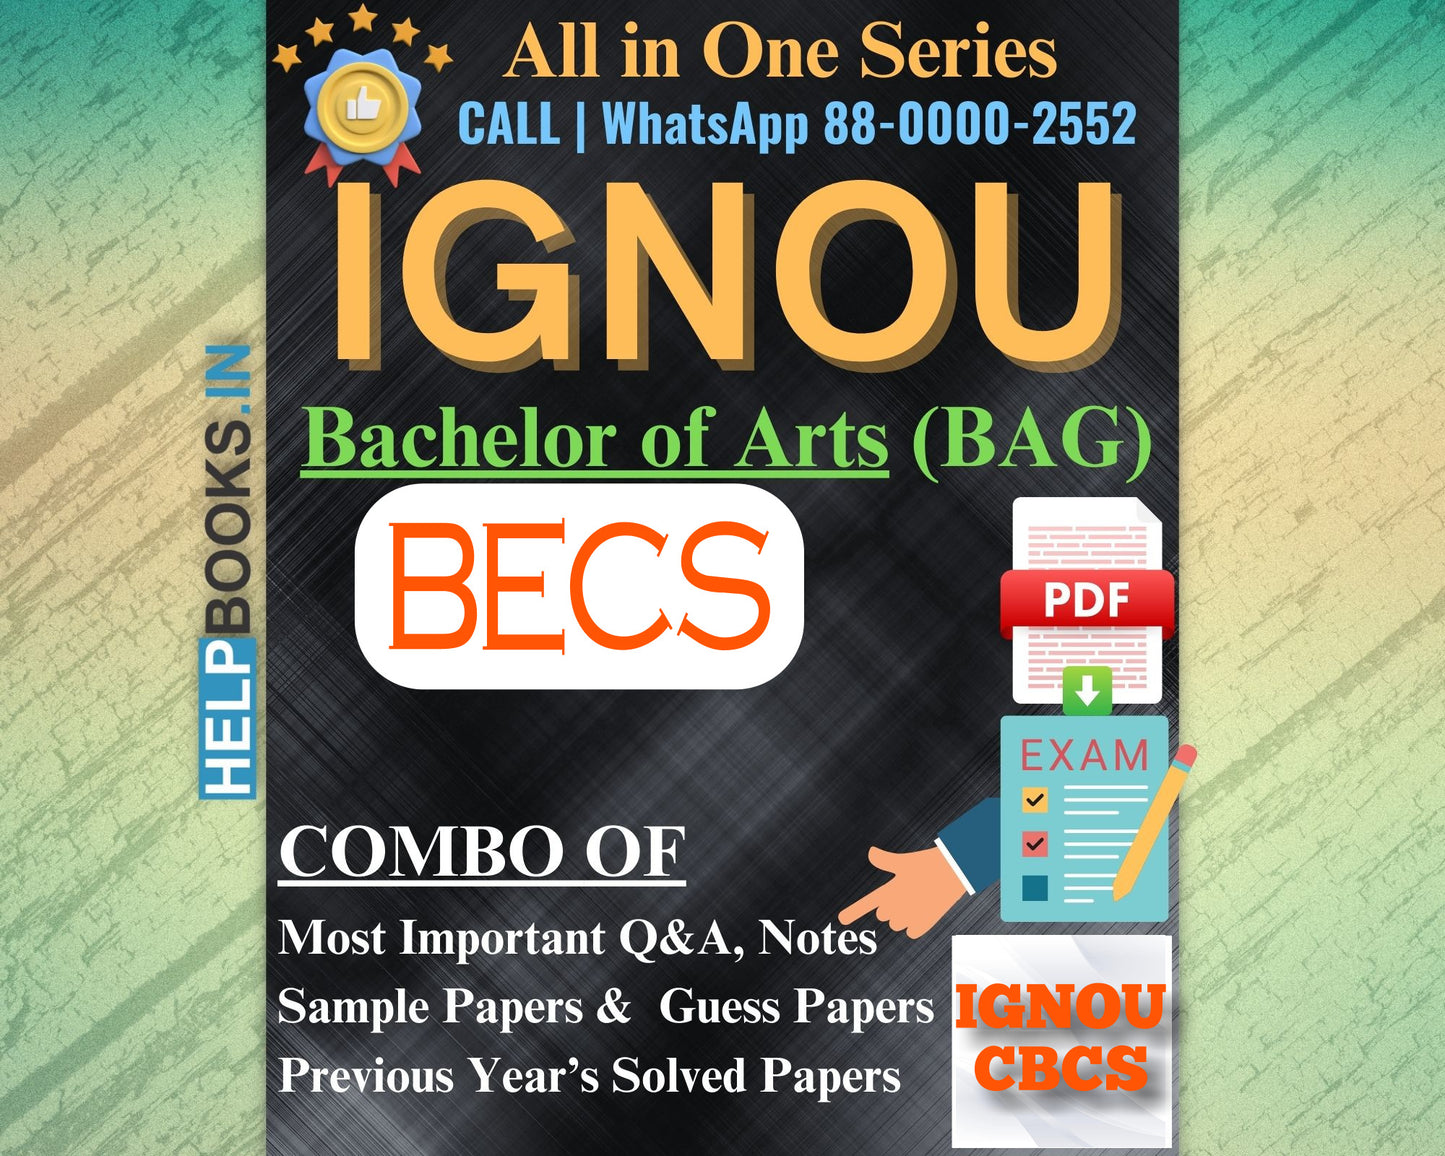 IGNOU BAG Online Study Package: Bachelor of Arts (BA) - Previous Year’s Solved Papers, Q&A, Exam Notes, Sample Papers, Guess Papers-BECS184